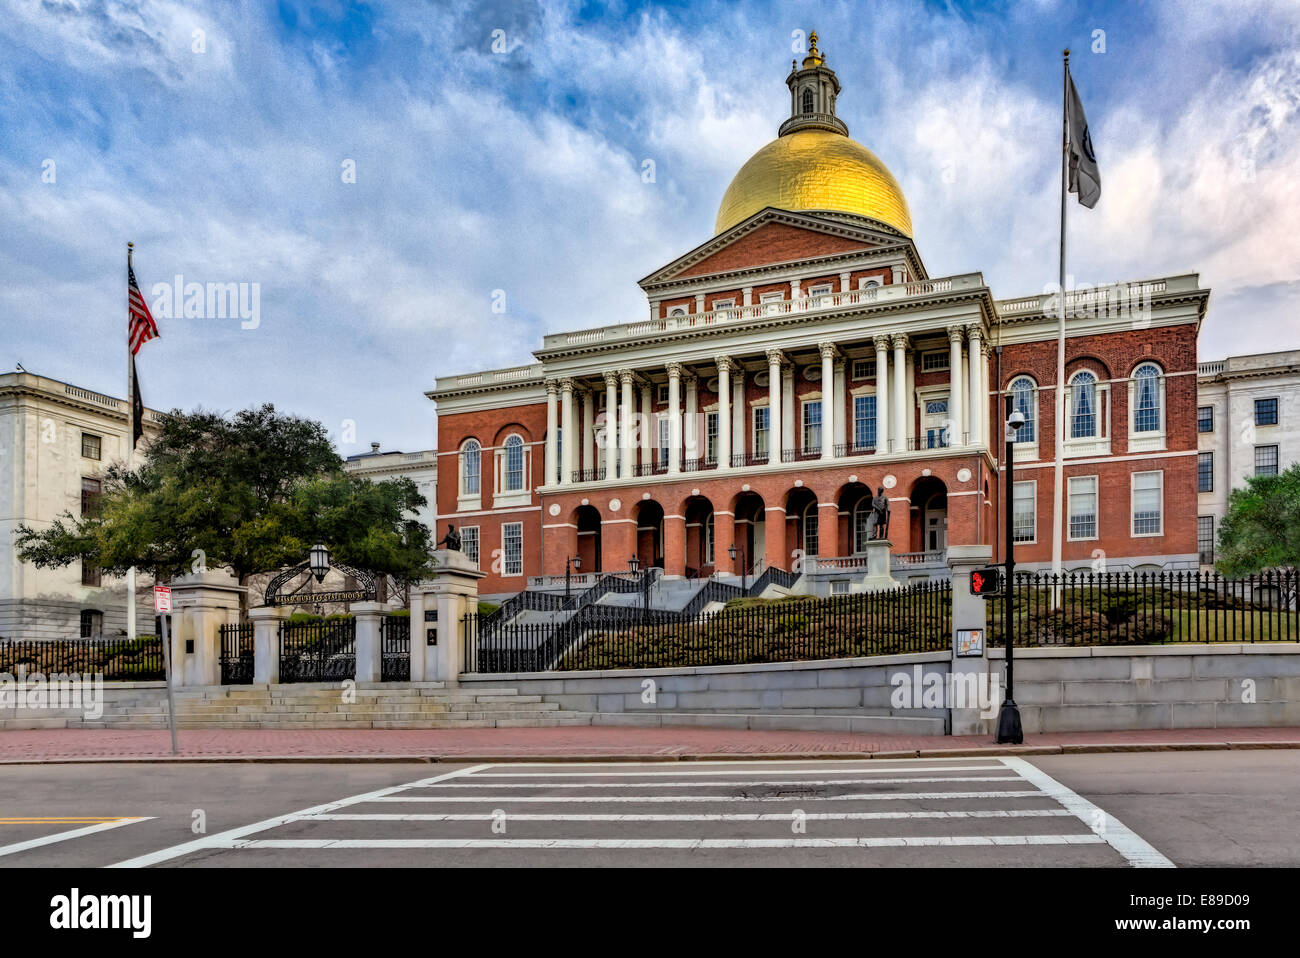 Massachusetts State House Haupt Eingang auch bekannt als das Massachusetts State House oder das "Neue" State House. Stockfoto